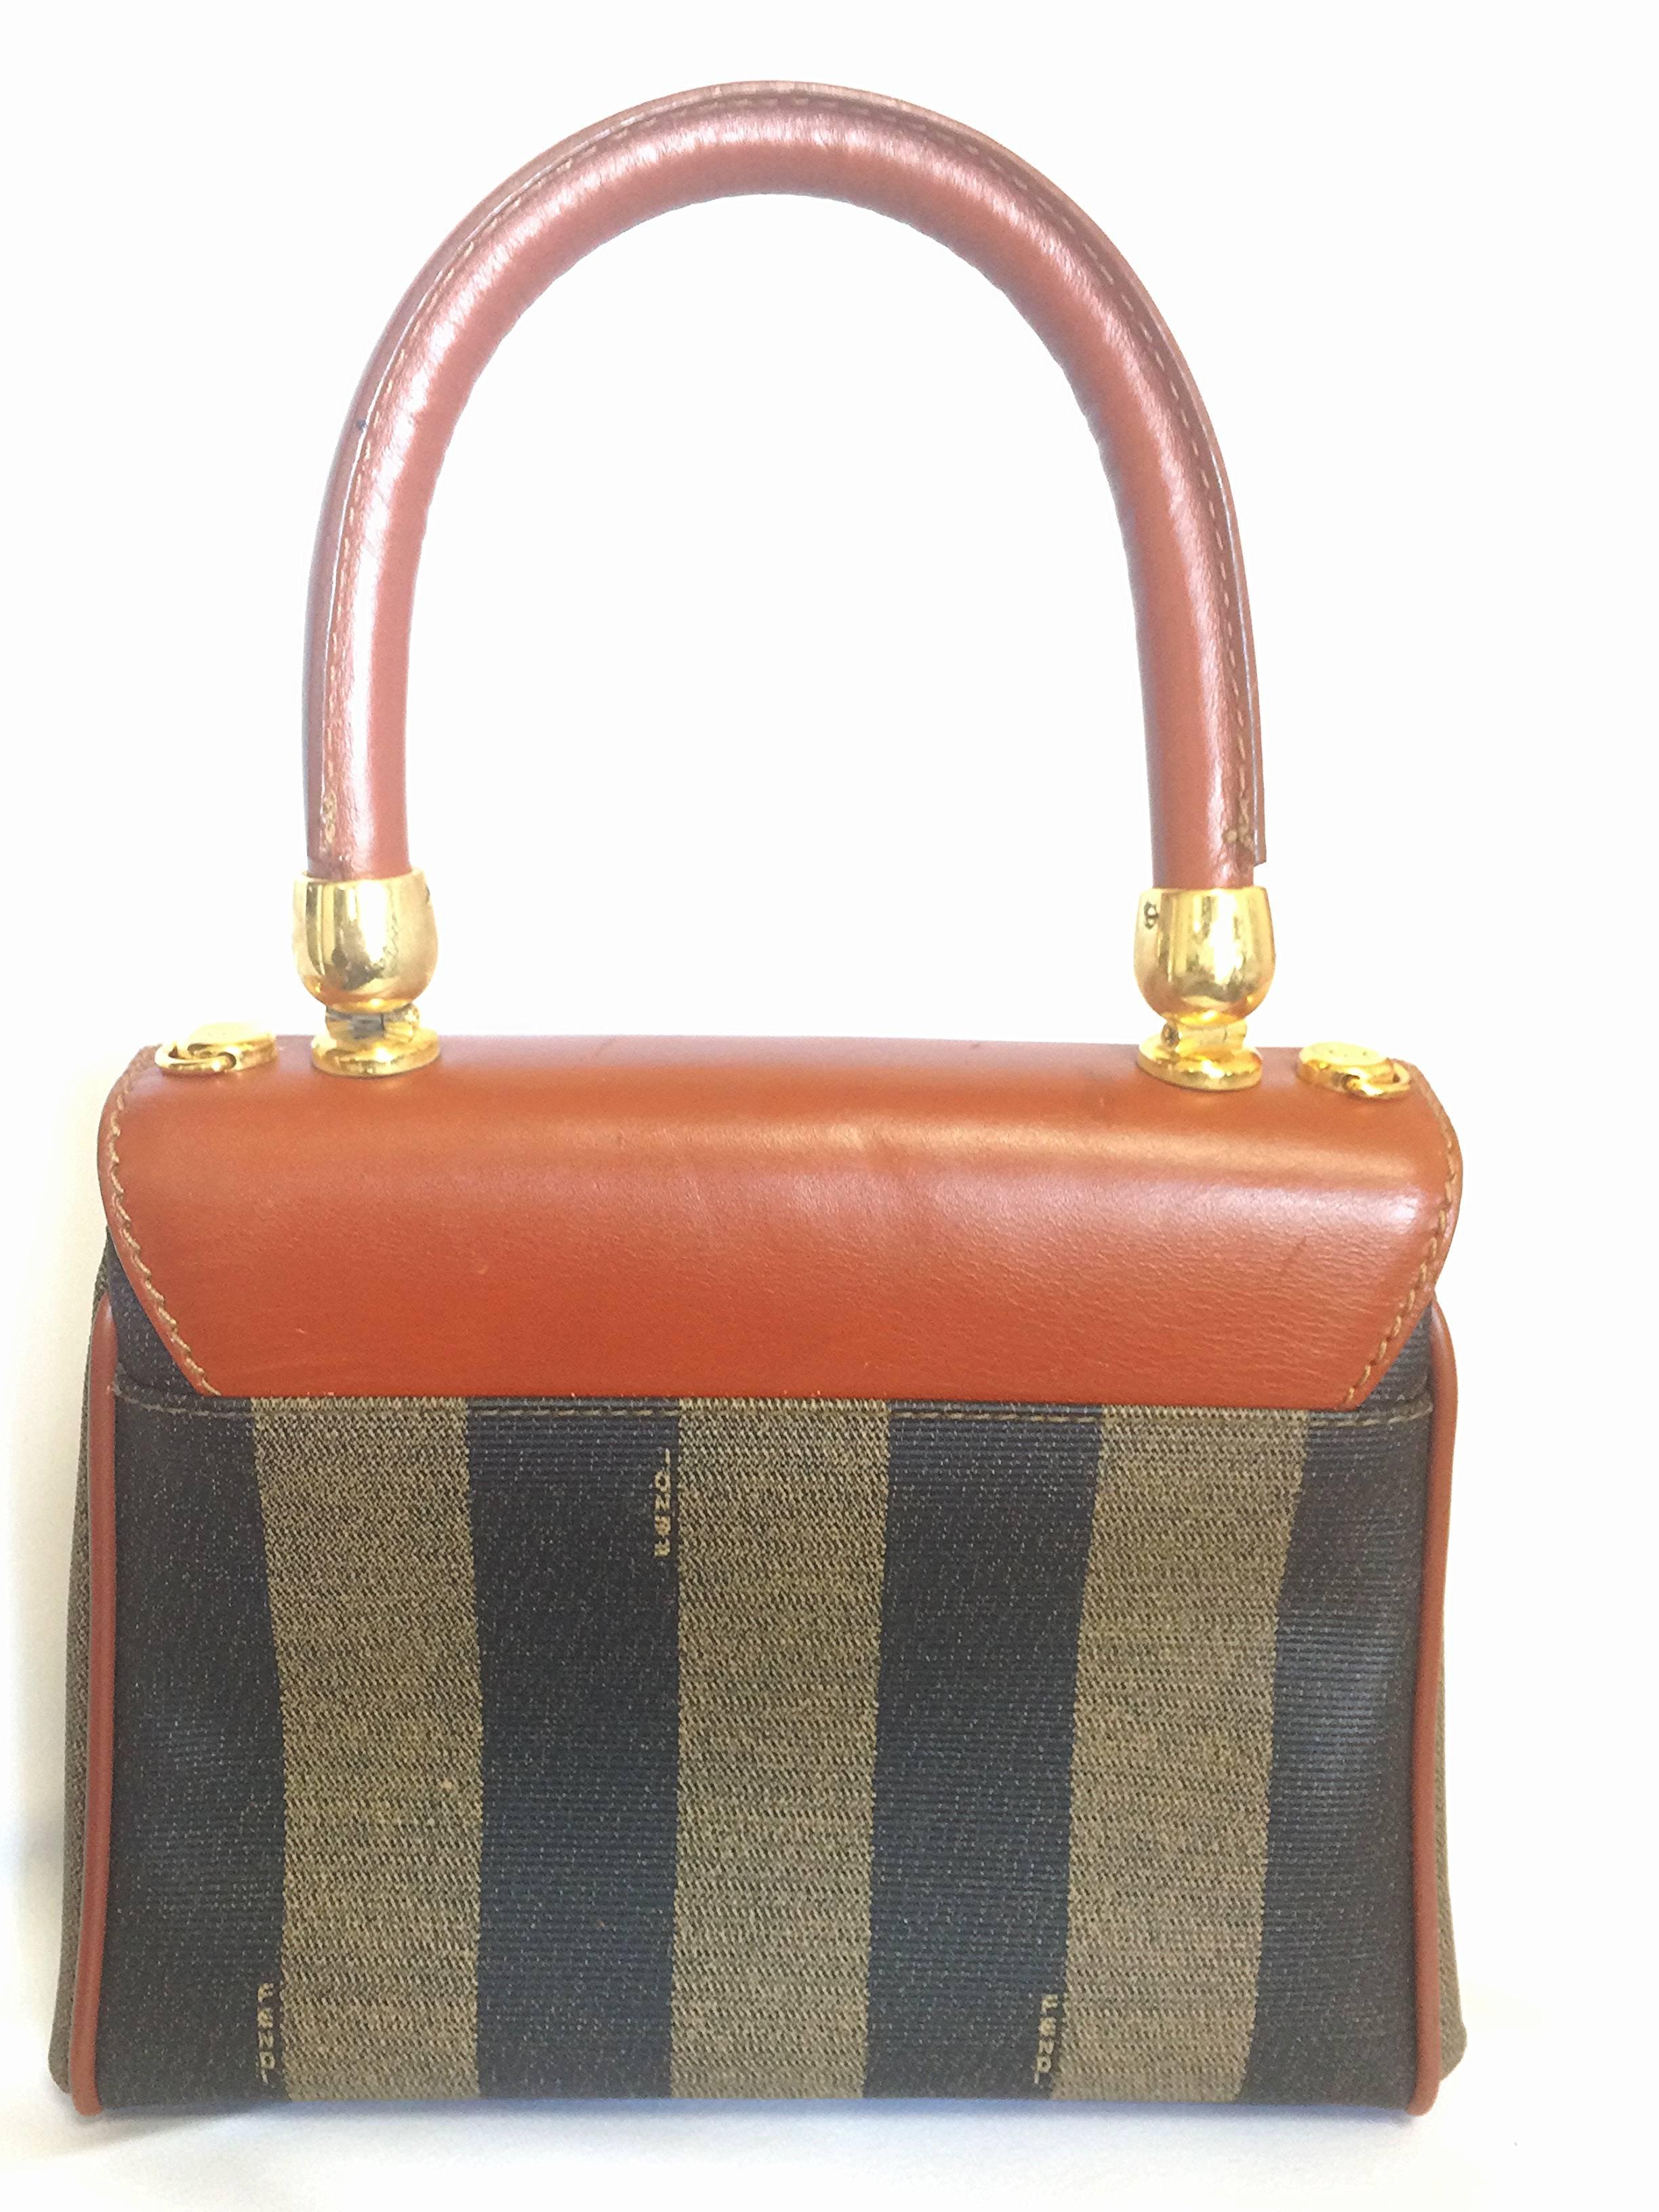 1990s. Vintage FENDI kelly bag style mini handbag in classic pecan stripes and brown leather handle. Classic vintage bag

For all FENDI vintage lovers, this classic purse is here for you!
Introducing a classic kelly style mini bag with pecan